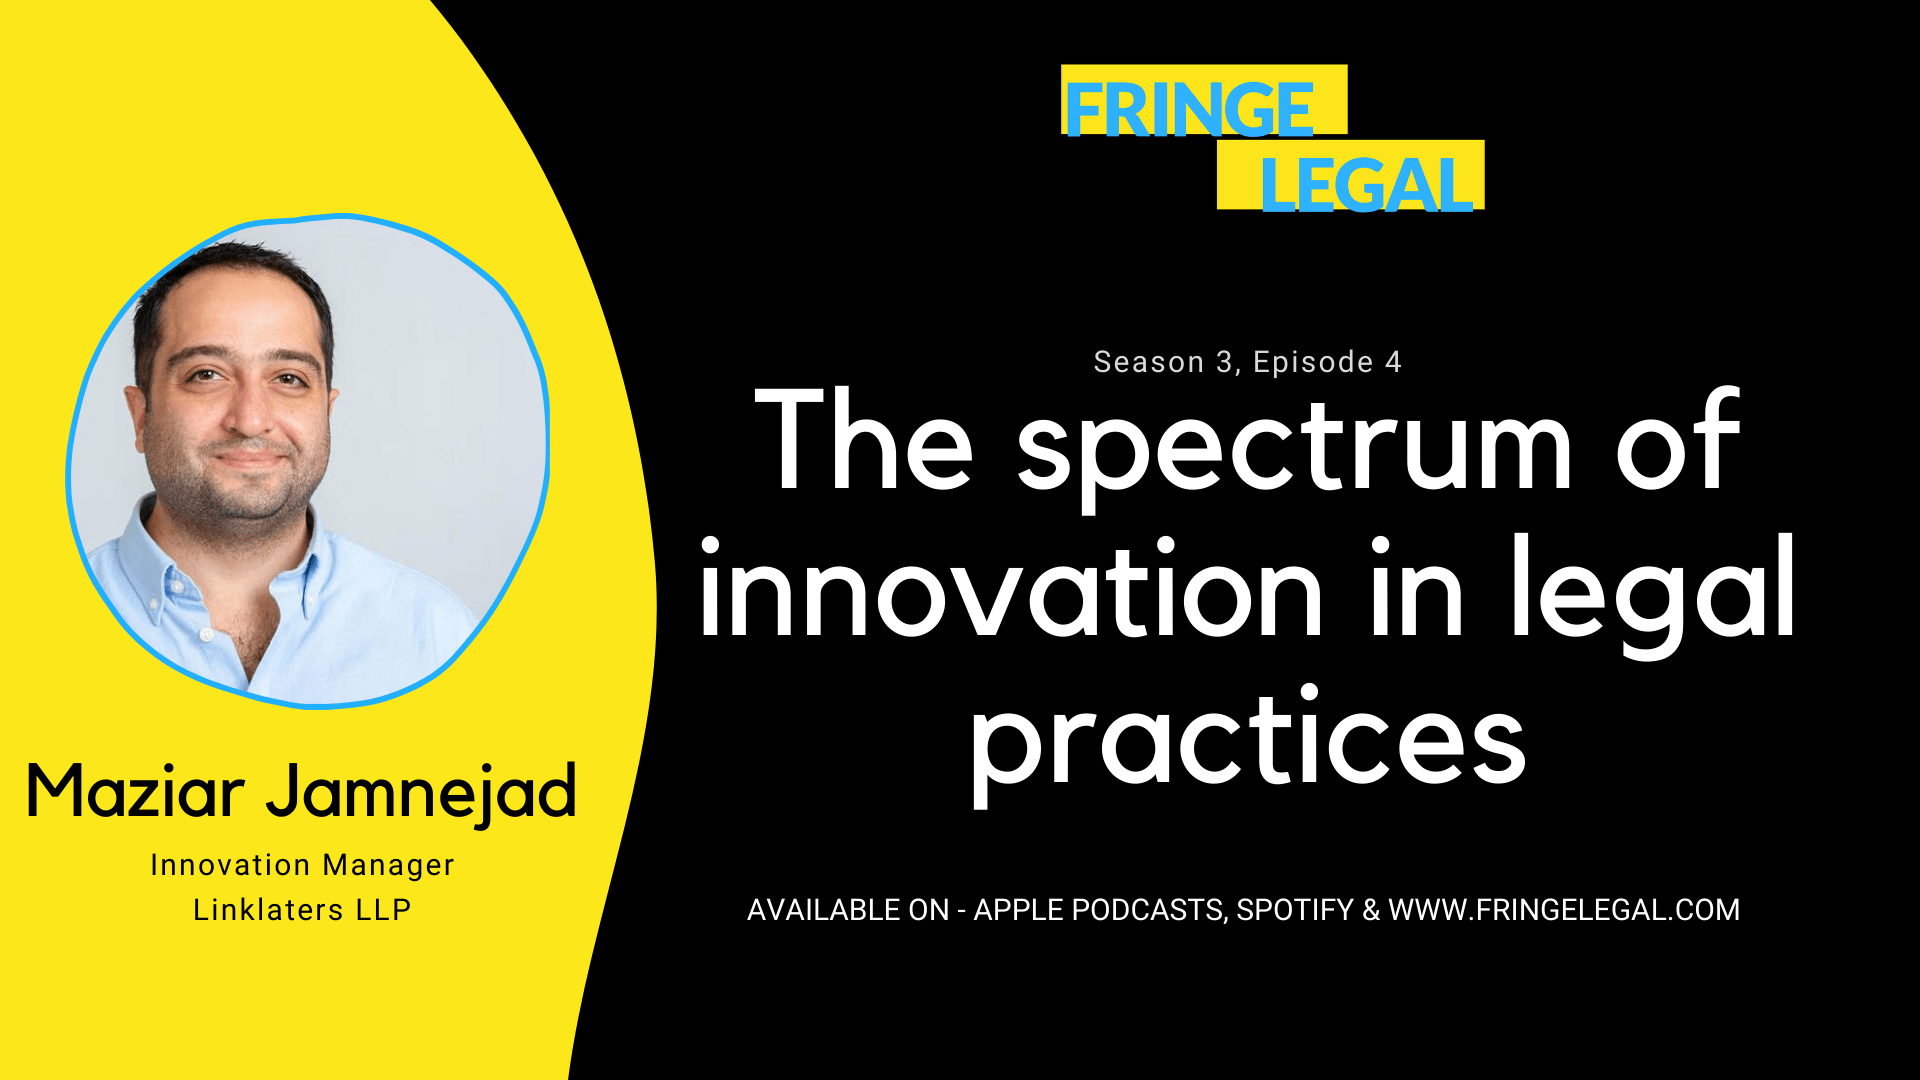 Maziar Jamnejad on the spectrum of innovation in legal practices